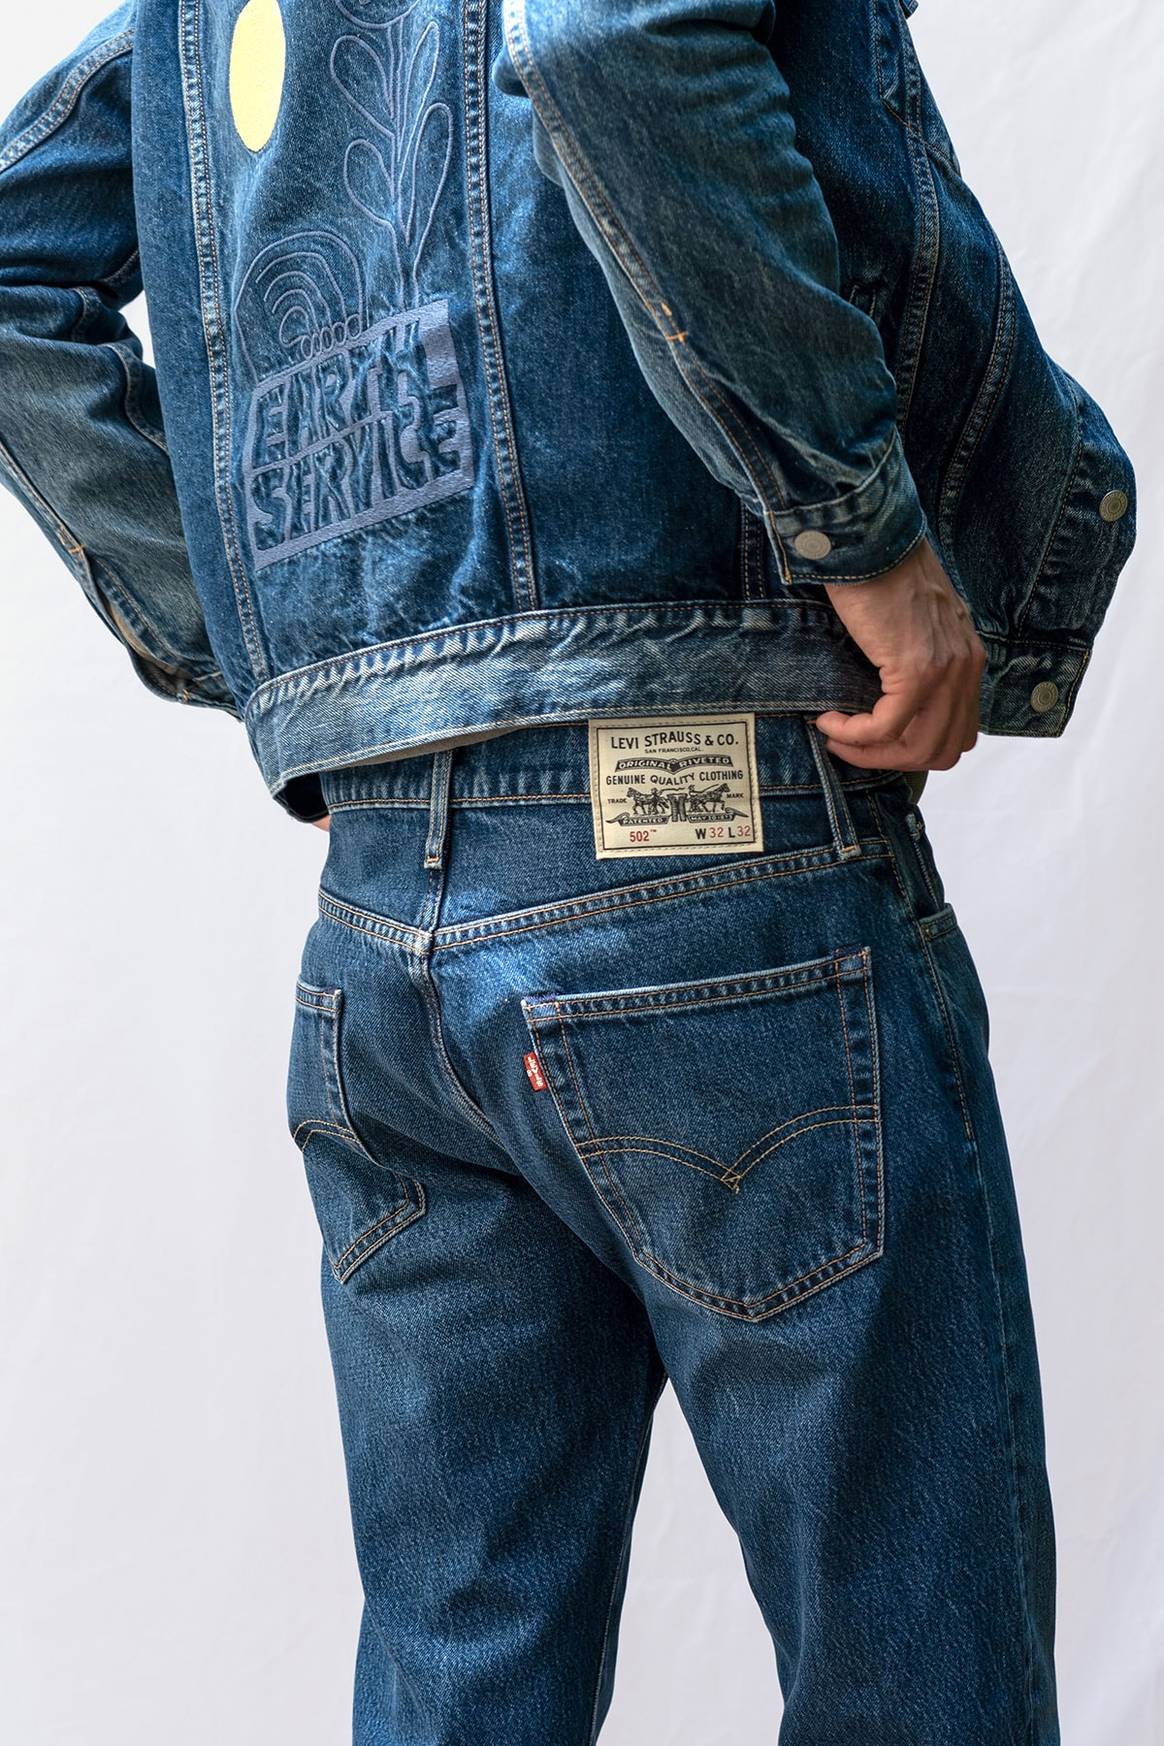 Levi’s unveils its most sustainable jeans to date